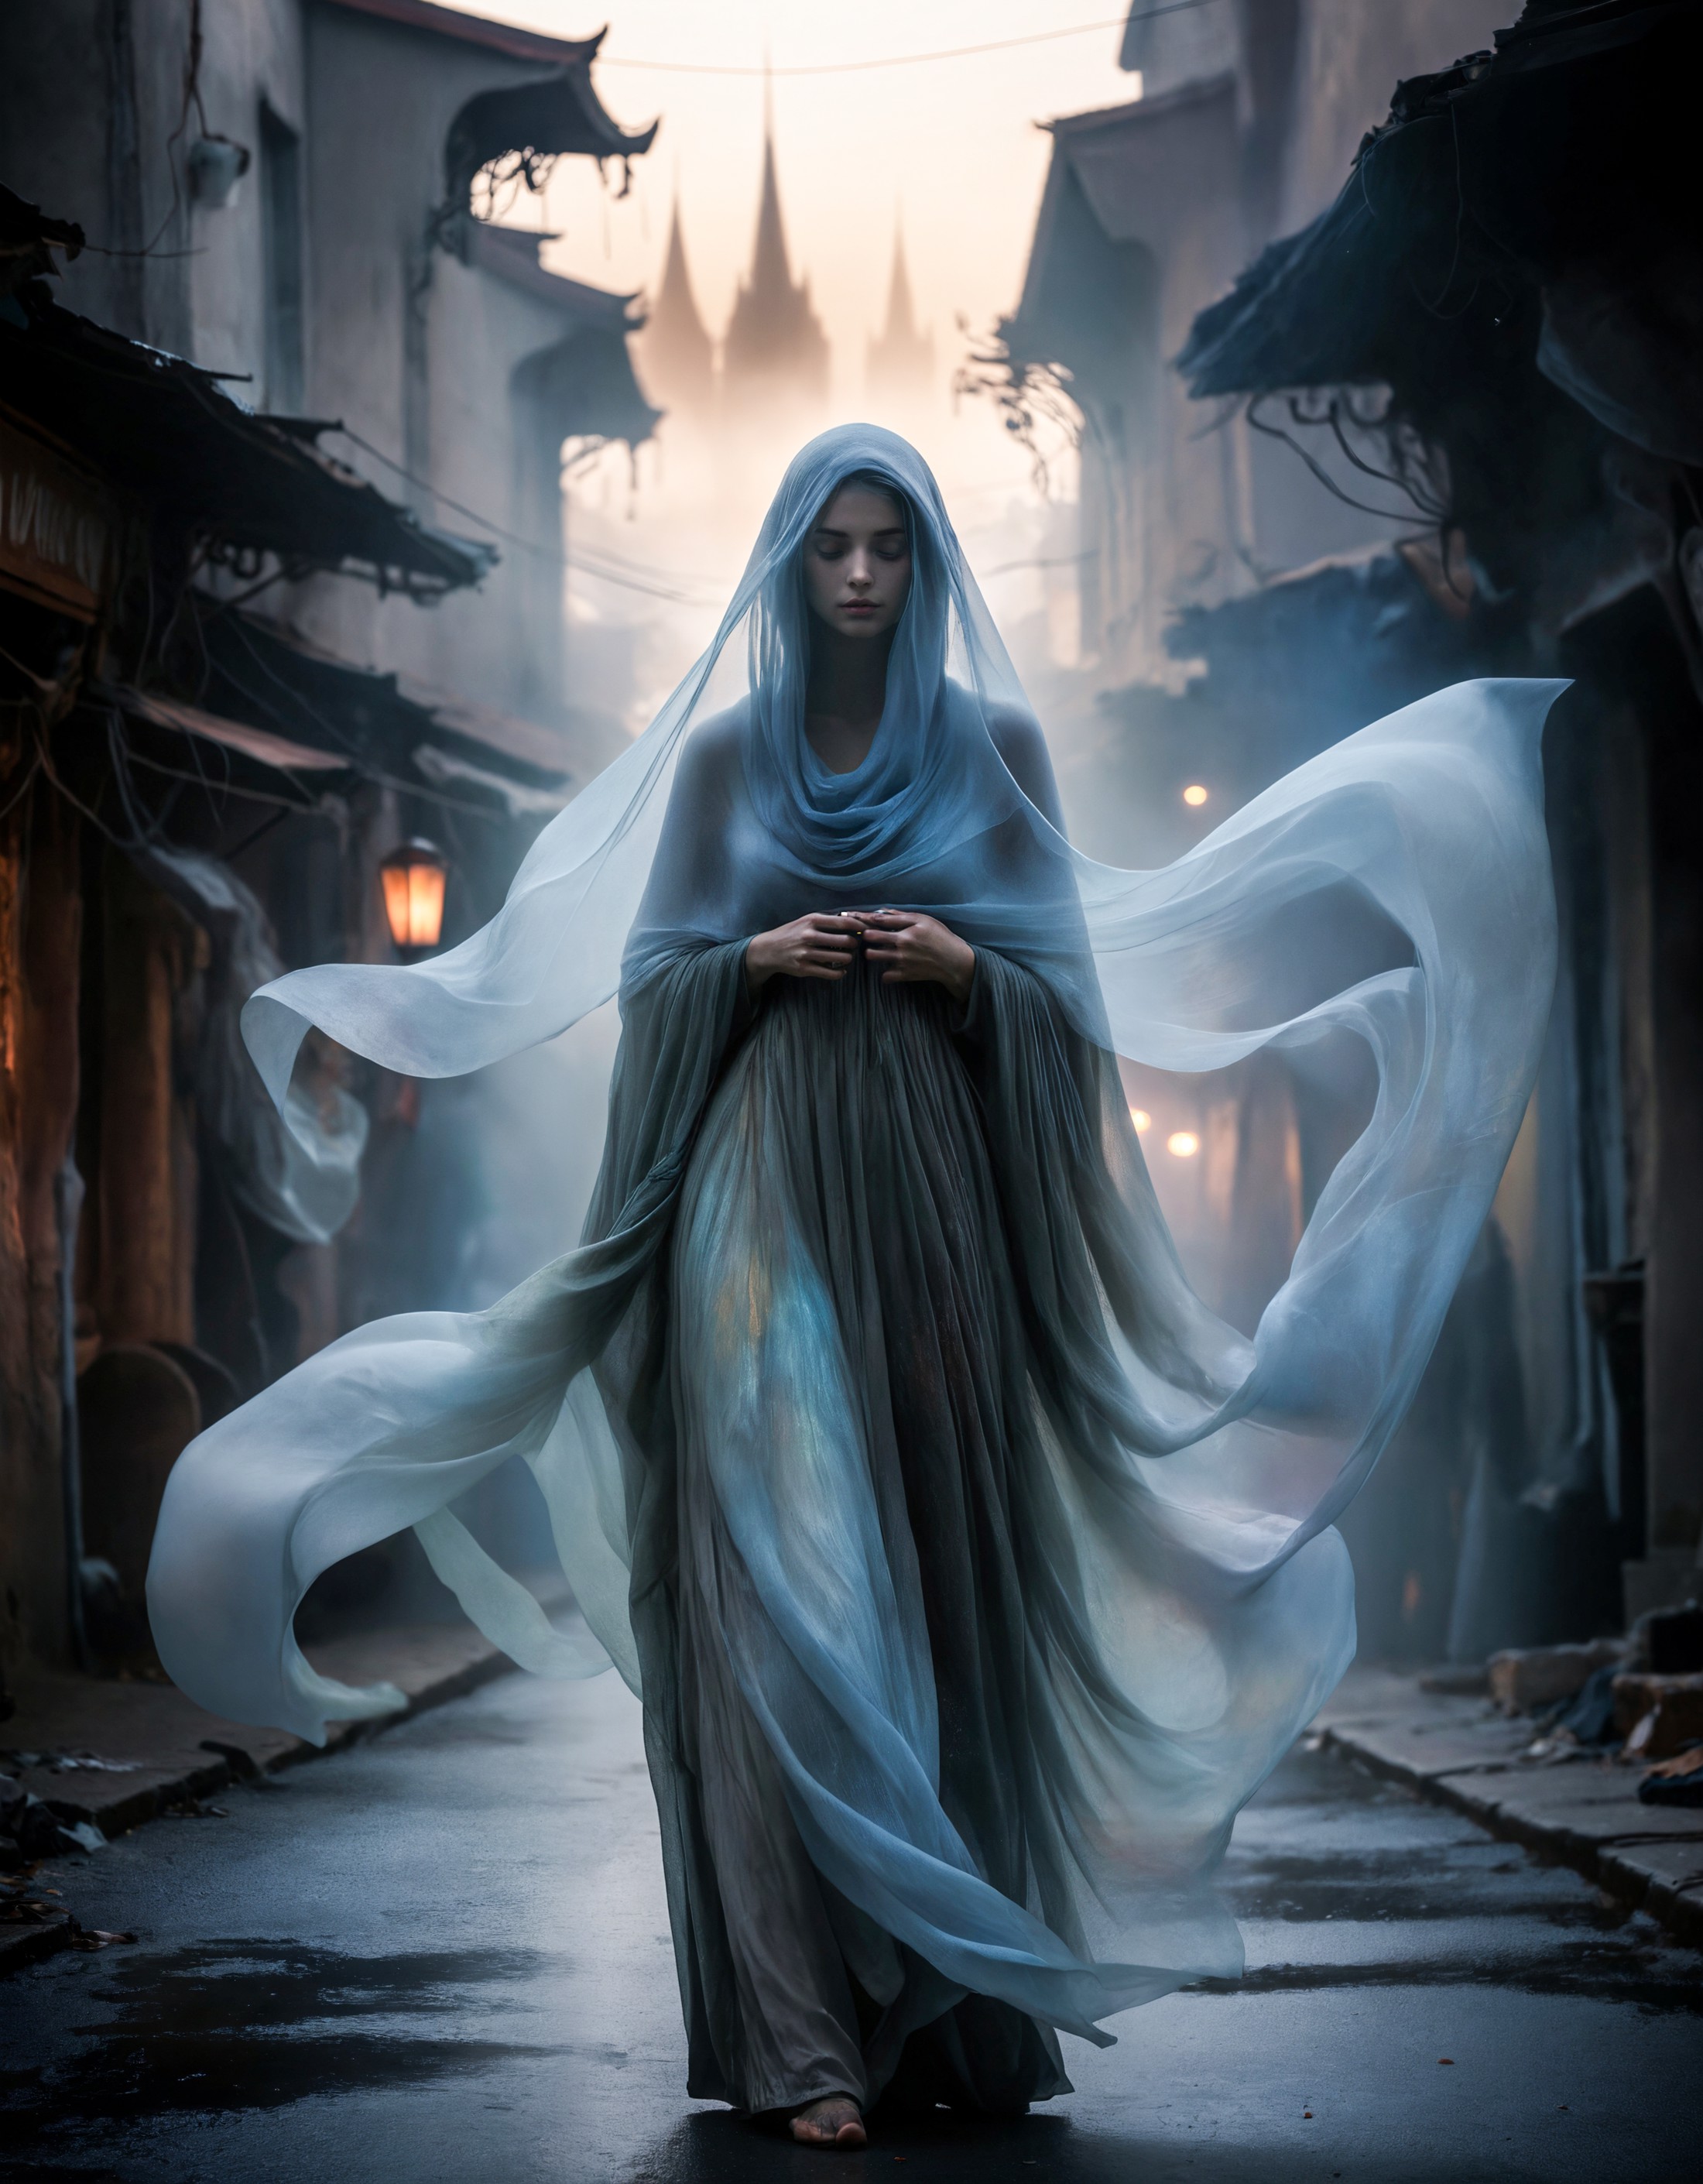 misty cityscape, the image portrays a mysterious figure cloaked in layers of flowing, iridescent fabric that shifts and sh...